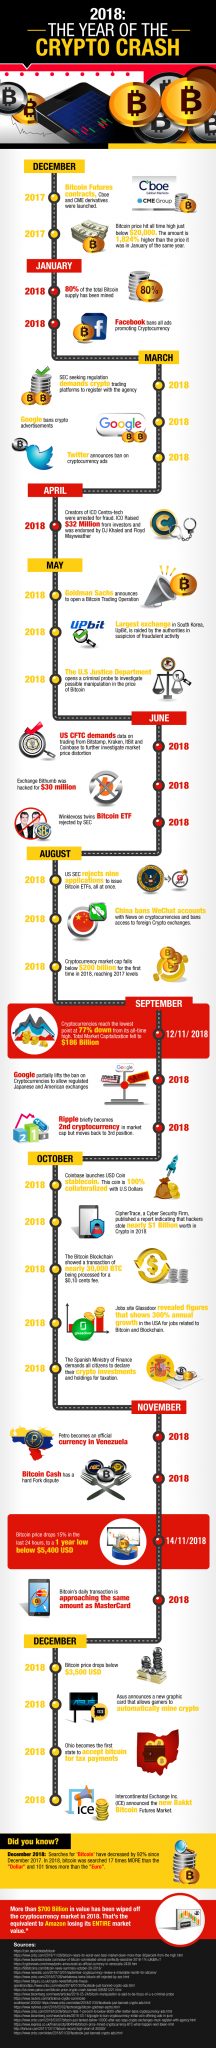 Infographic: the year of the crypto crash - 2018 - FinTech Futures